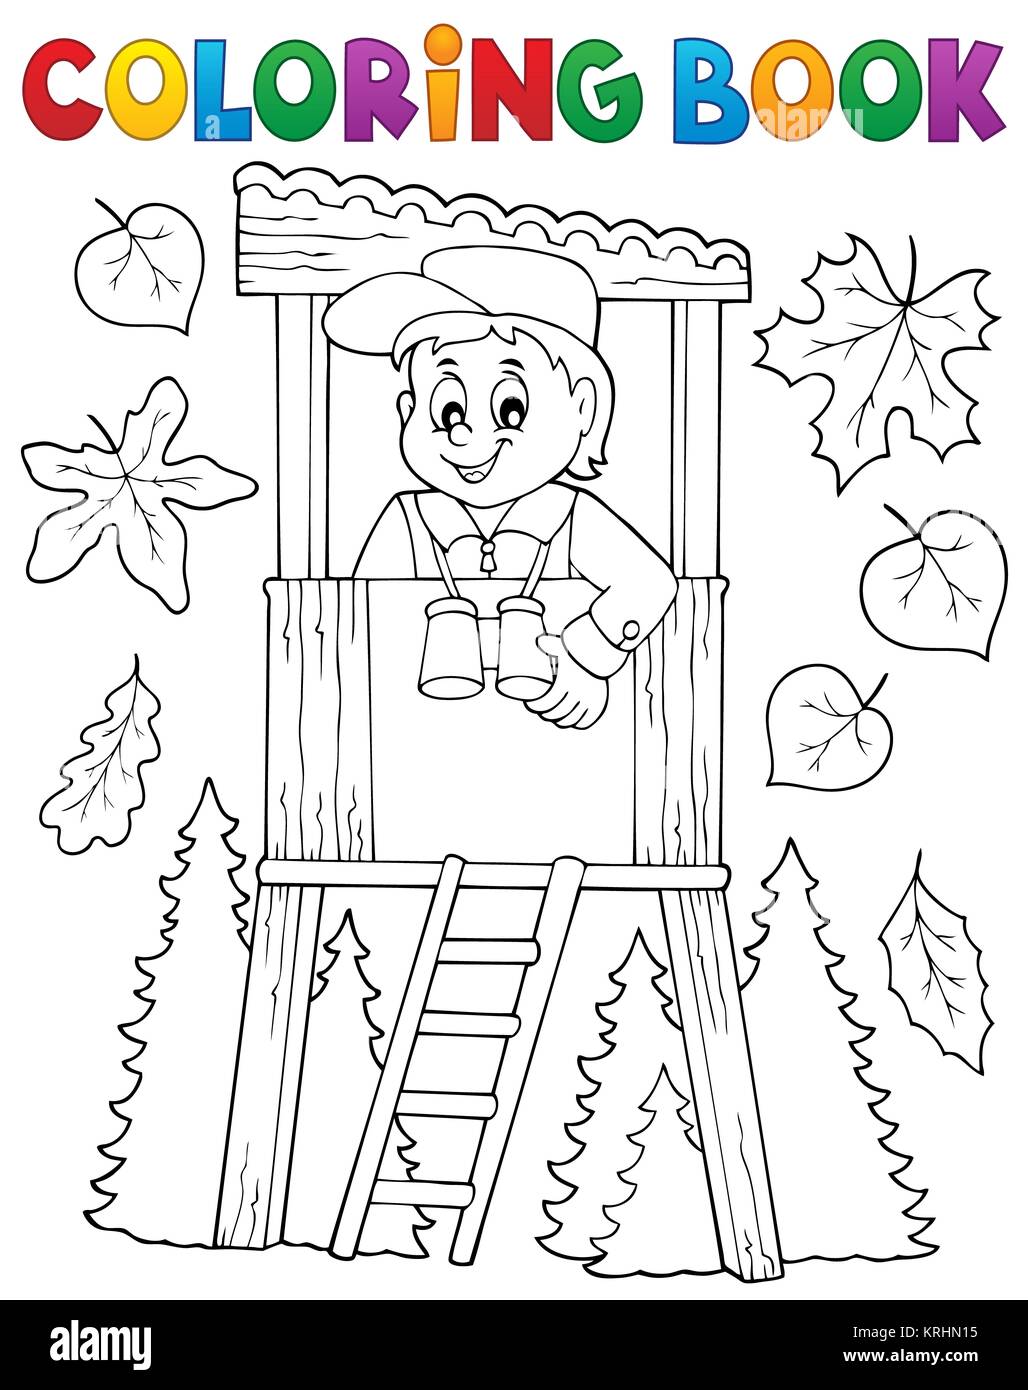 Coloring book forester theme 1 Stock Photo